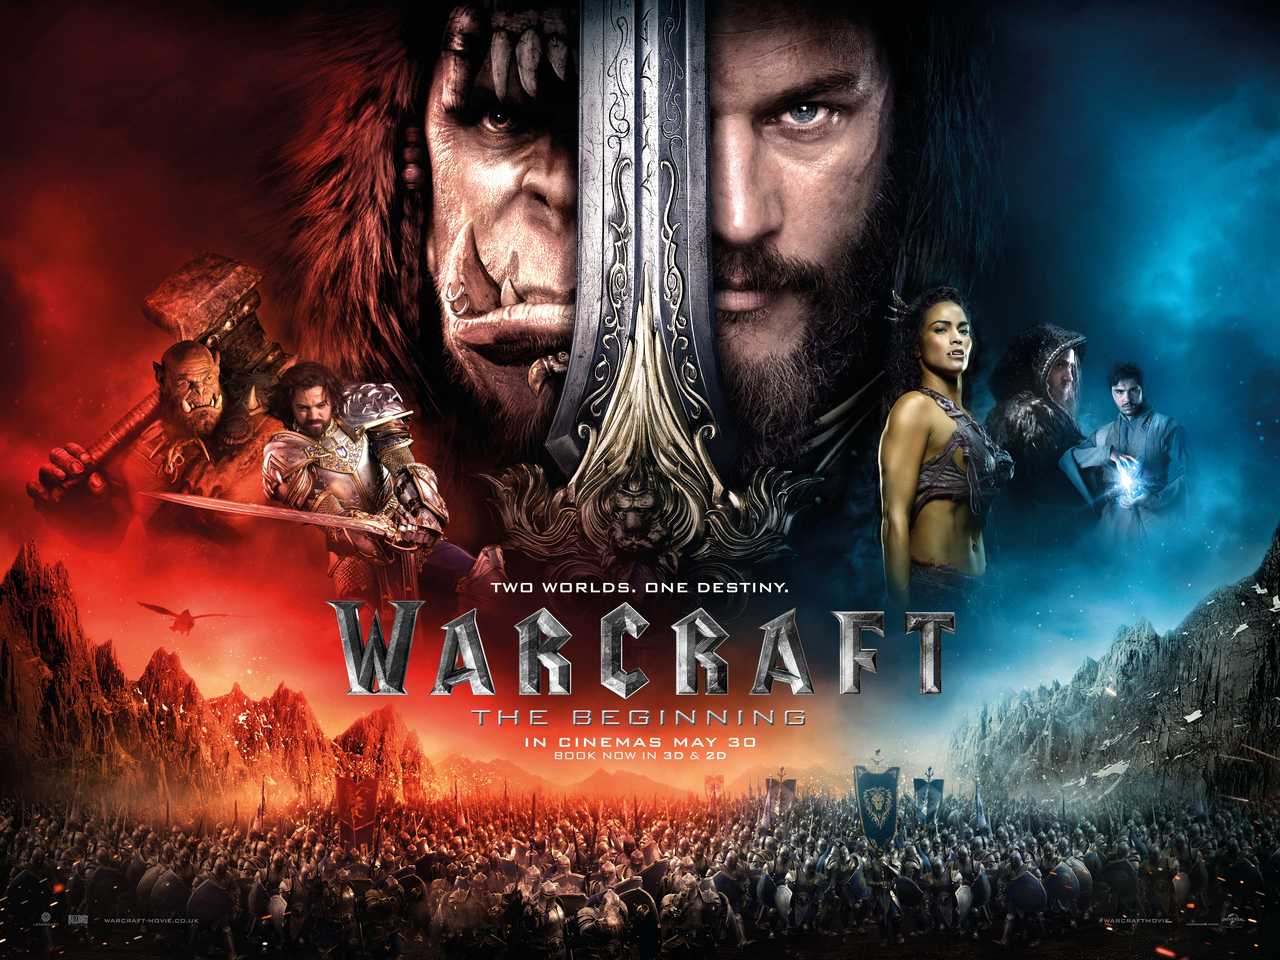 Warcraft Movie (spoiler Free) Background Info And Q&A